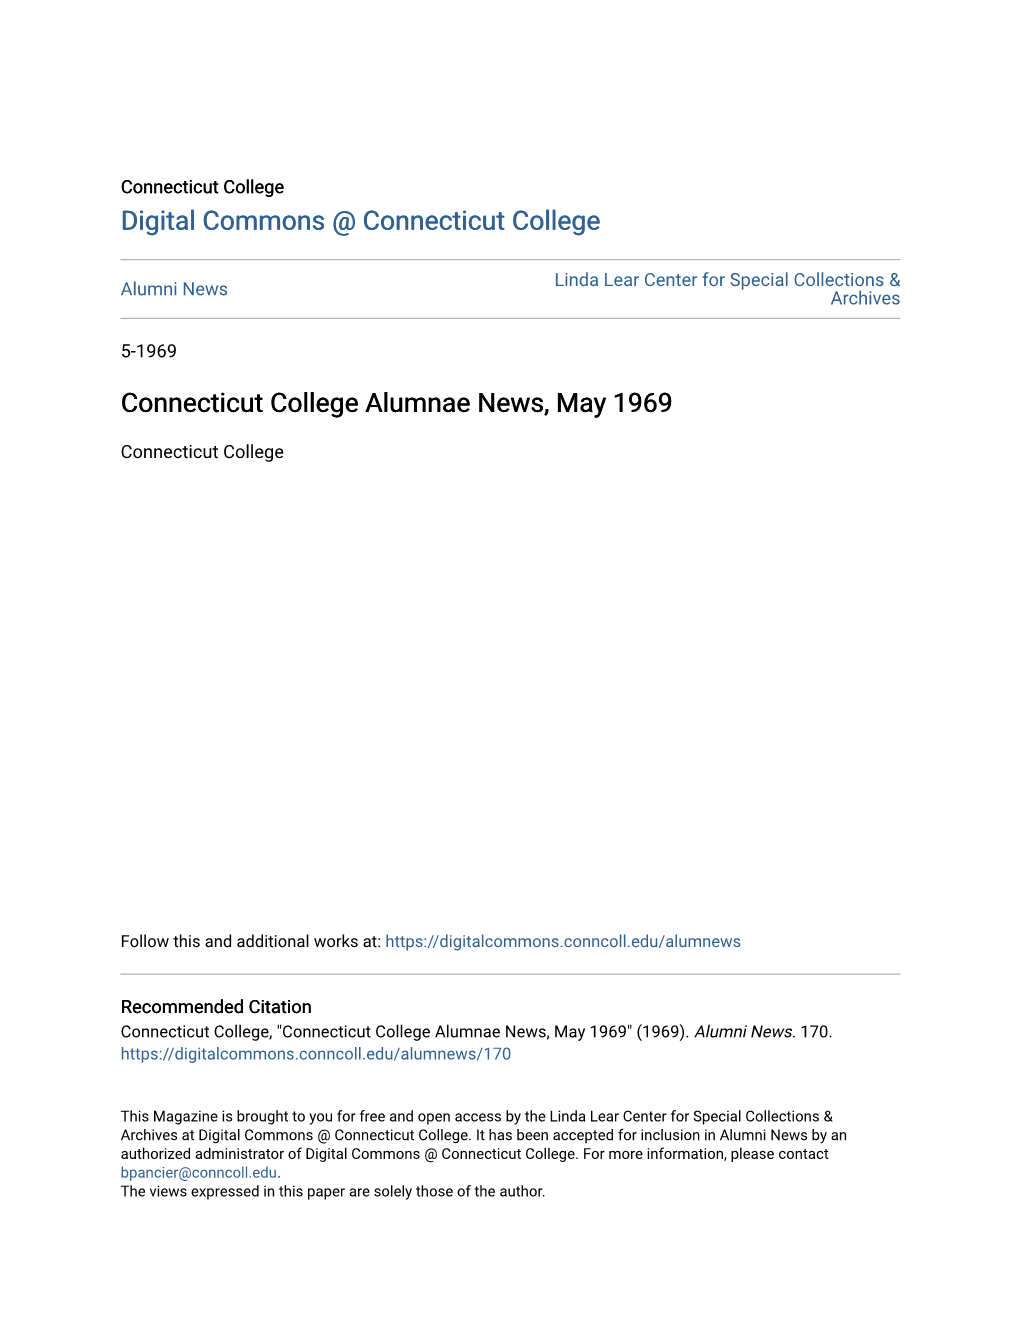 Connecticut College Alumnae News, May 1969